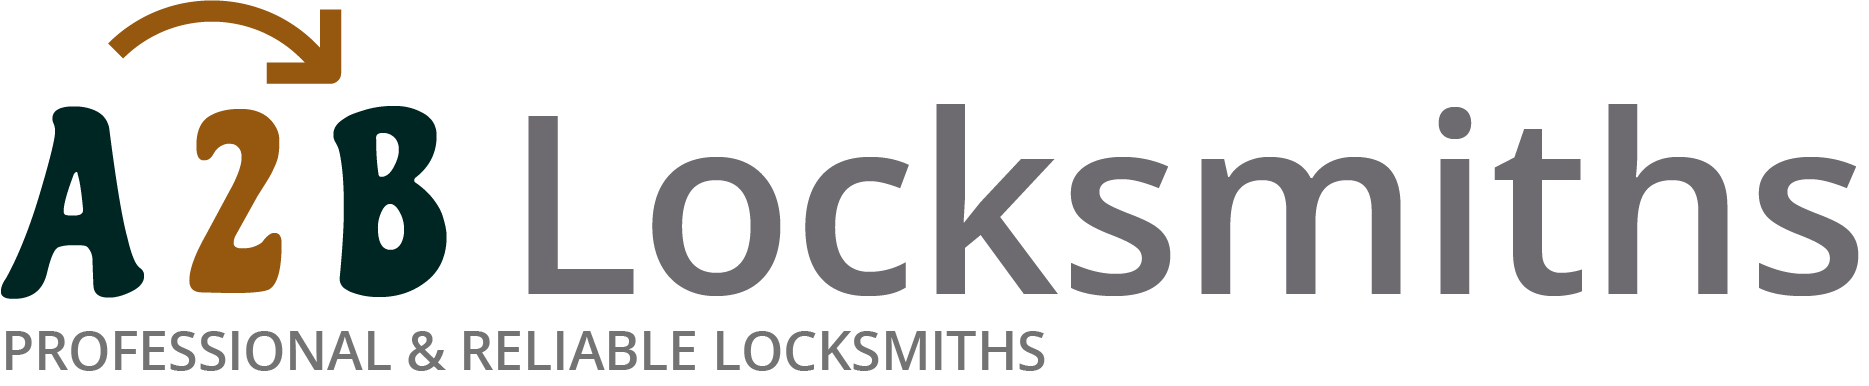 If you are locked out of house in Sevenoaks, our 24/7 local emergency locksmith services can help you.